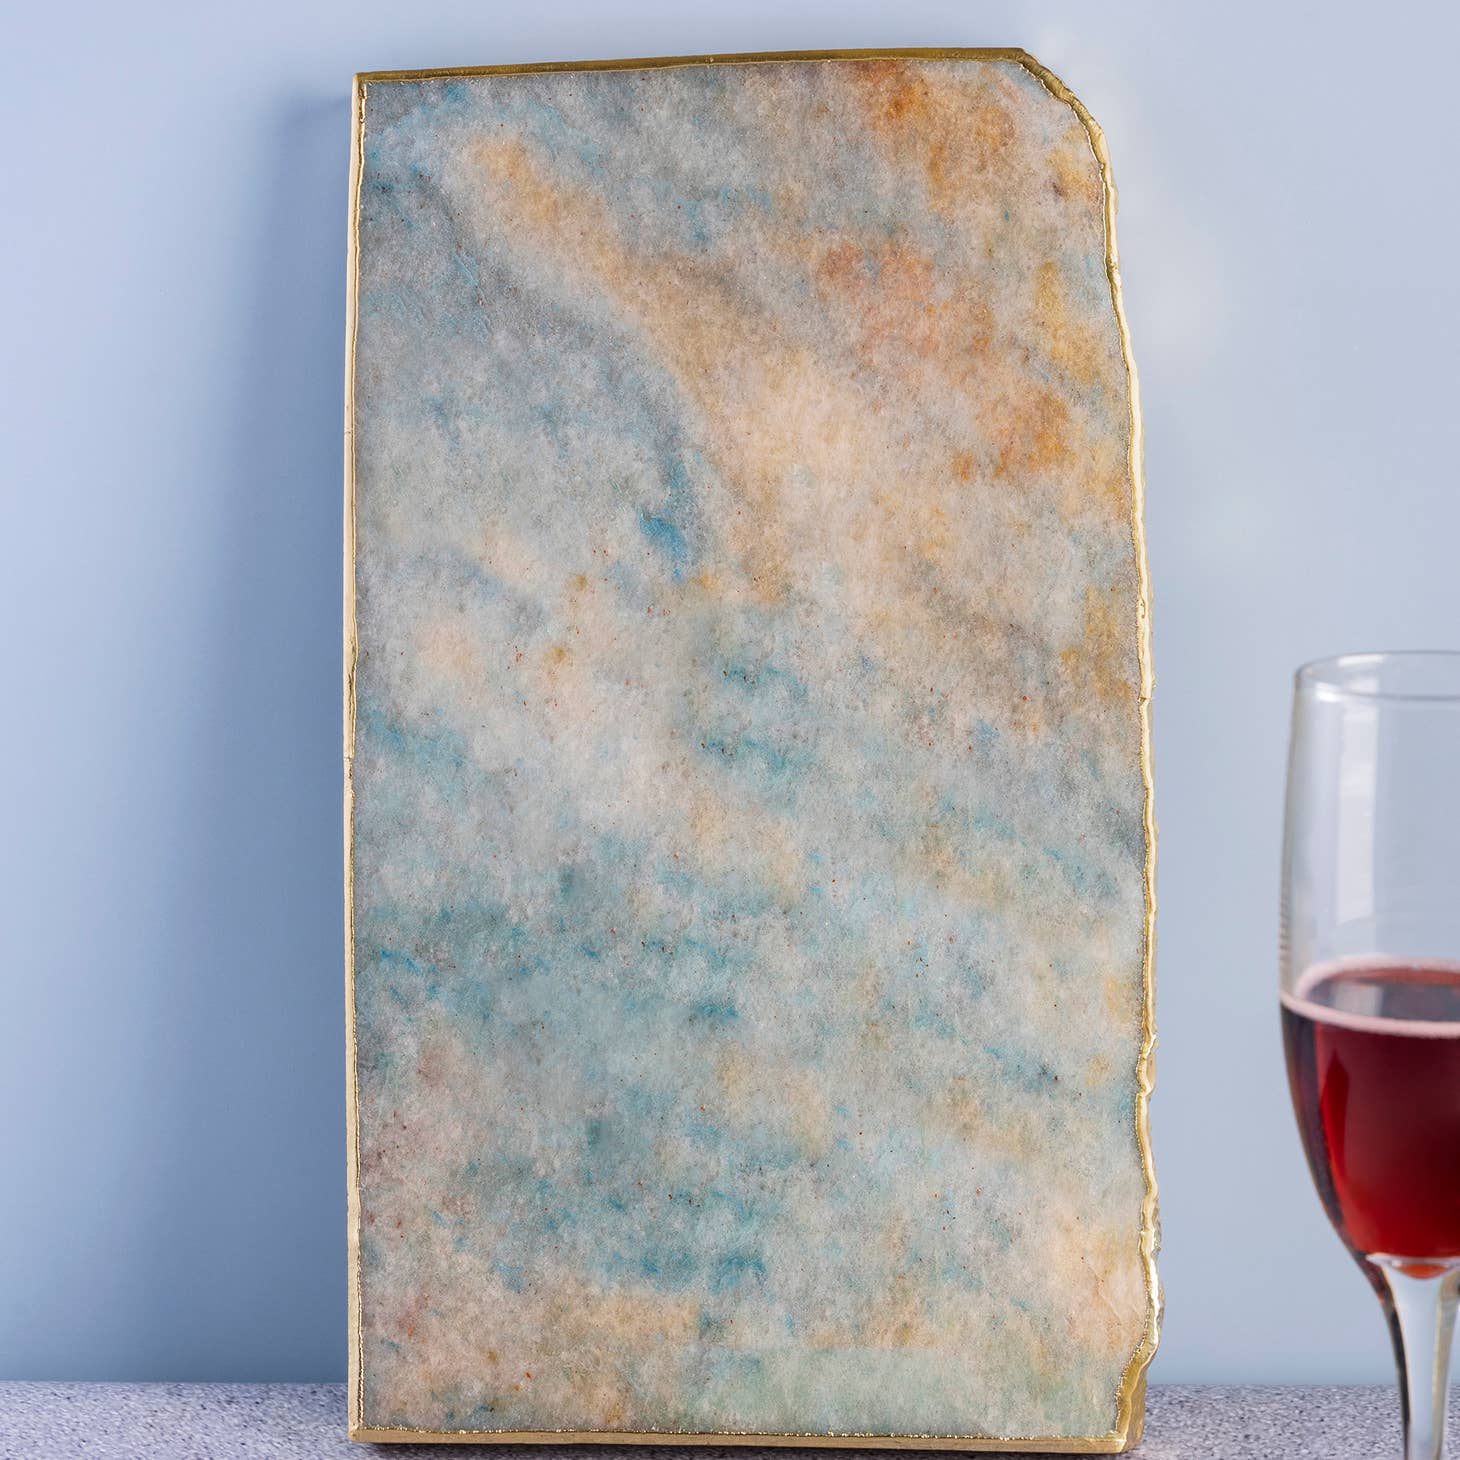 Suitable for use at both formal and informal occasions, this handcrafted aventurine cheese board is gilded with gold edges, & the perfect size to serve an array of options. made in india